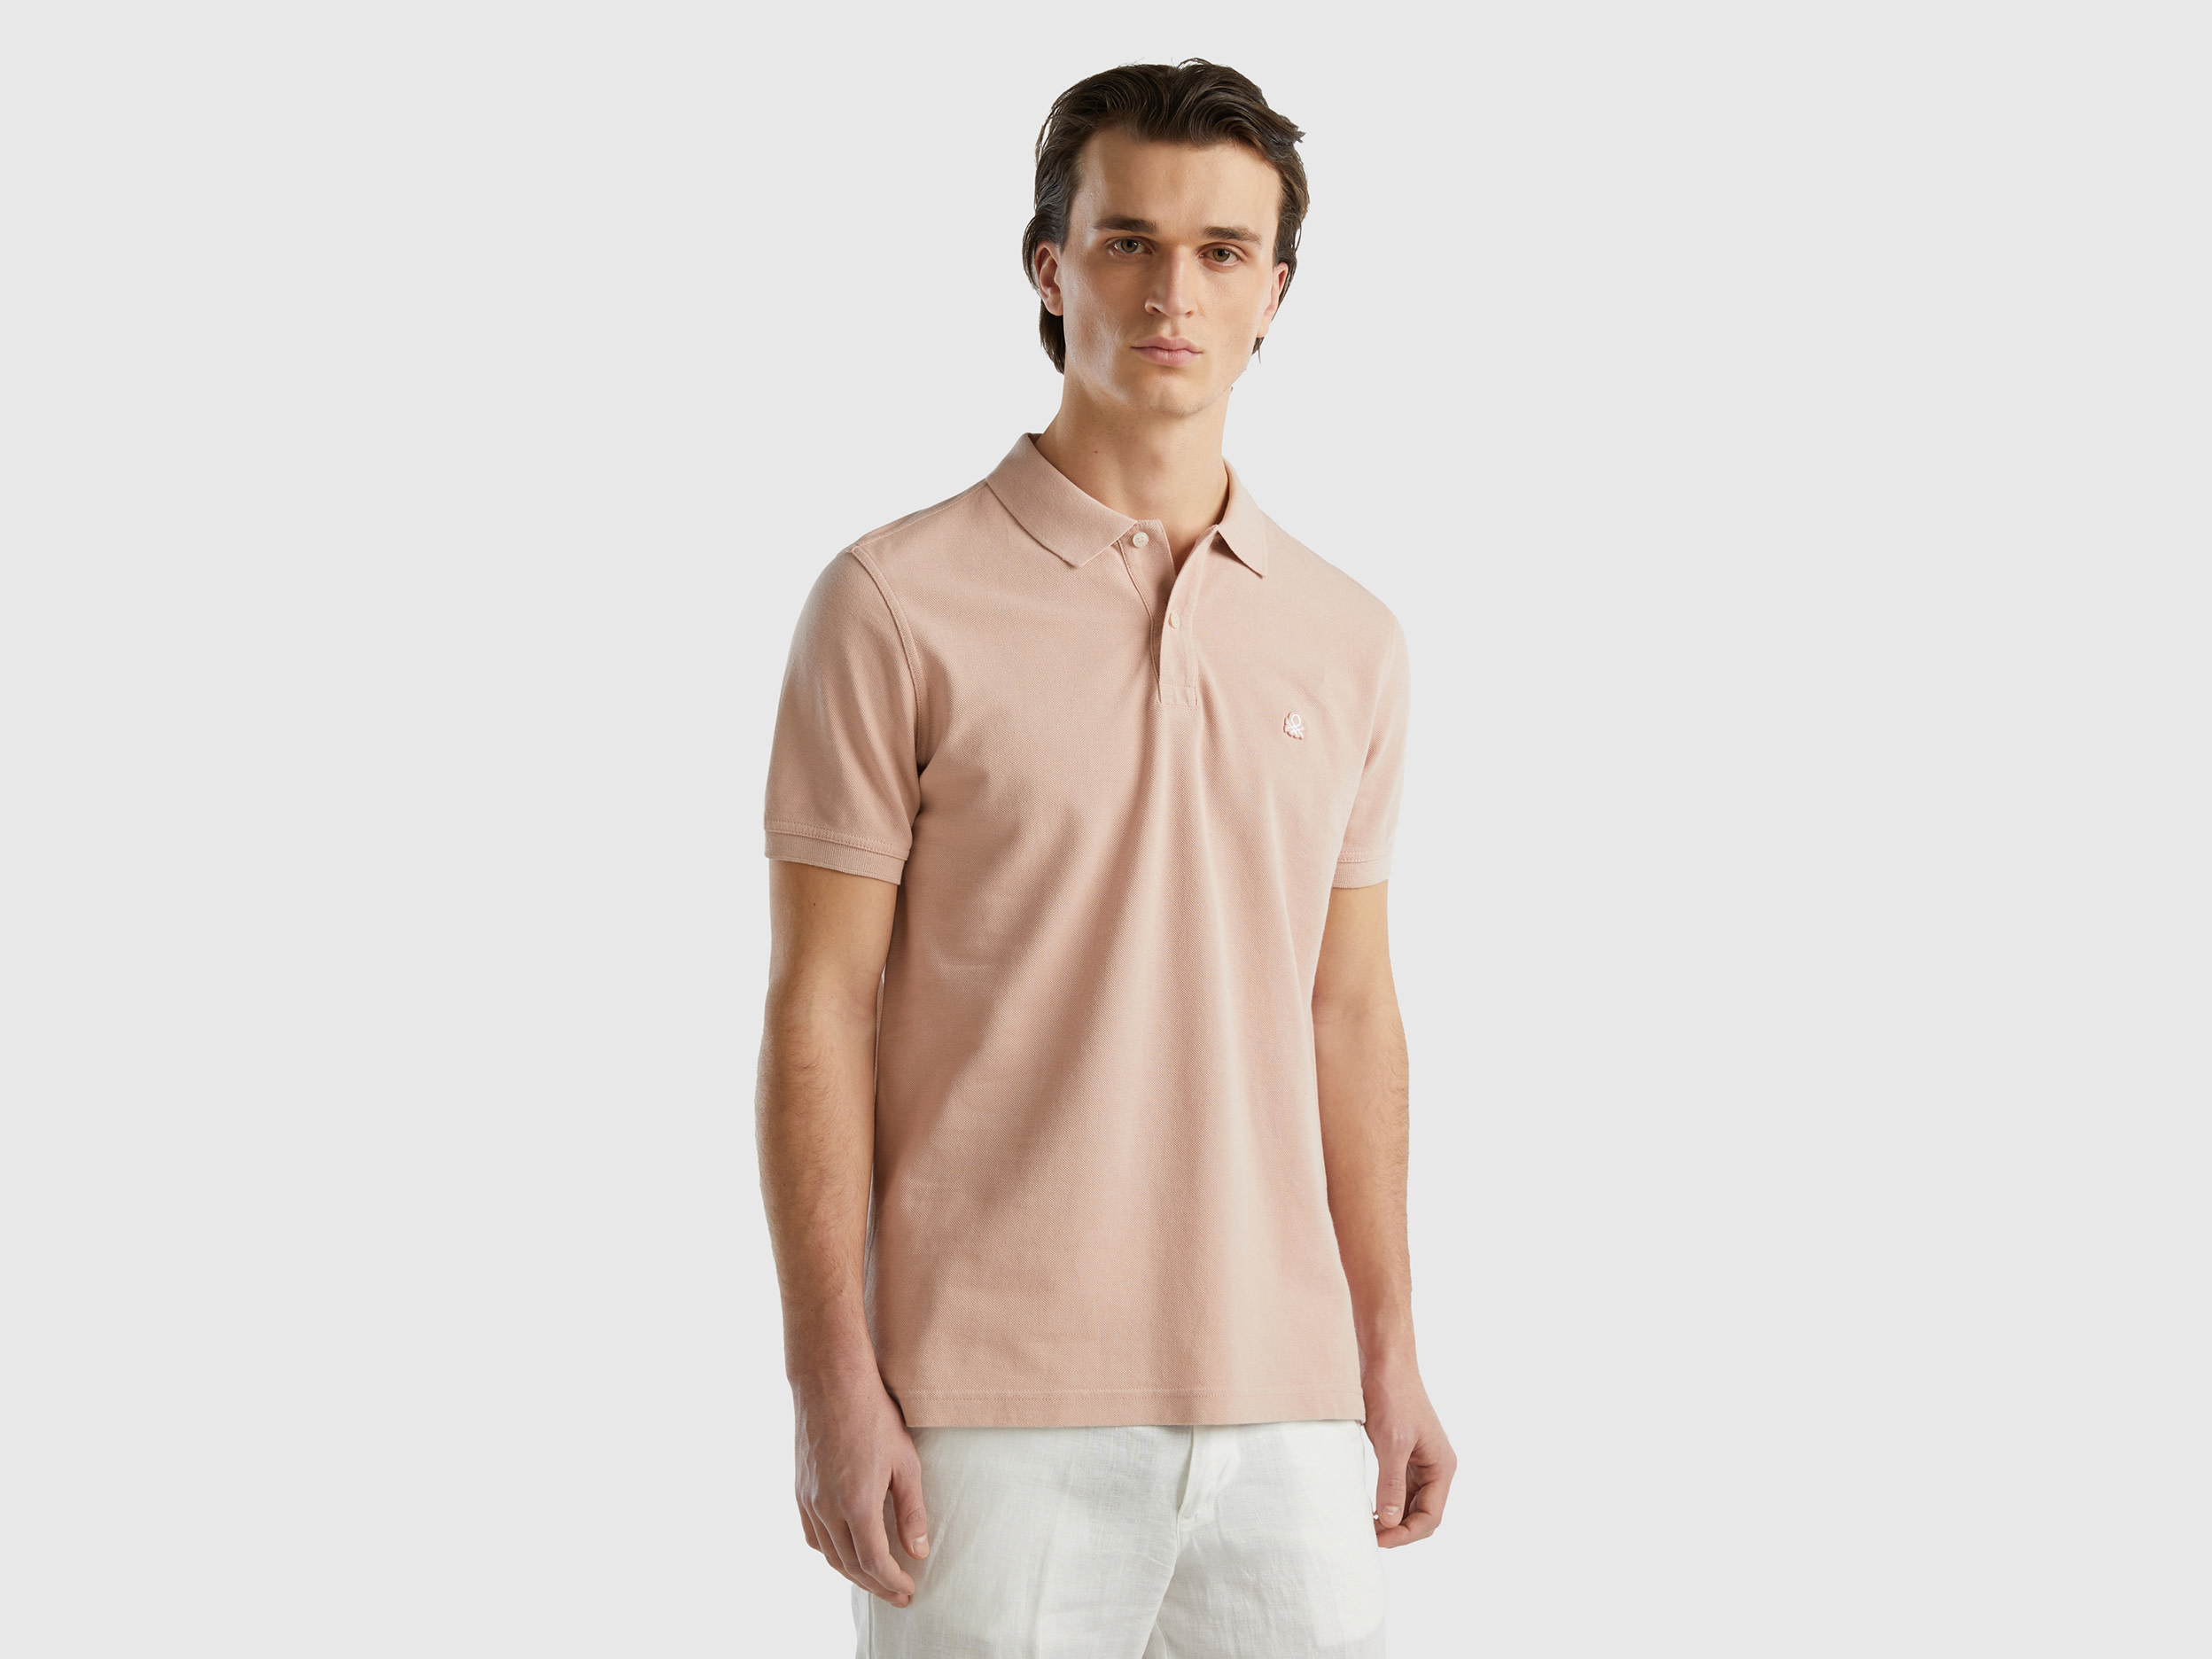 Image of Benetton, Pink Regular Fit Polo, size S, Nude, Men